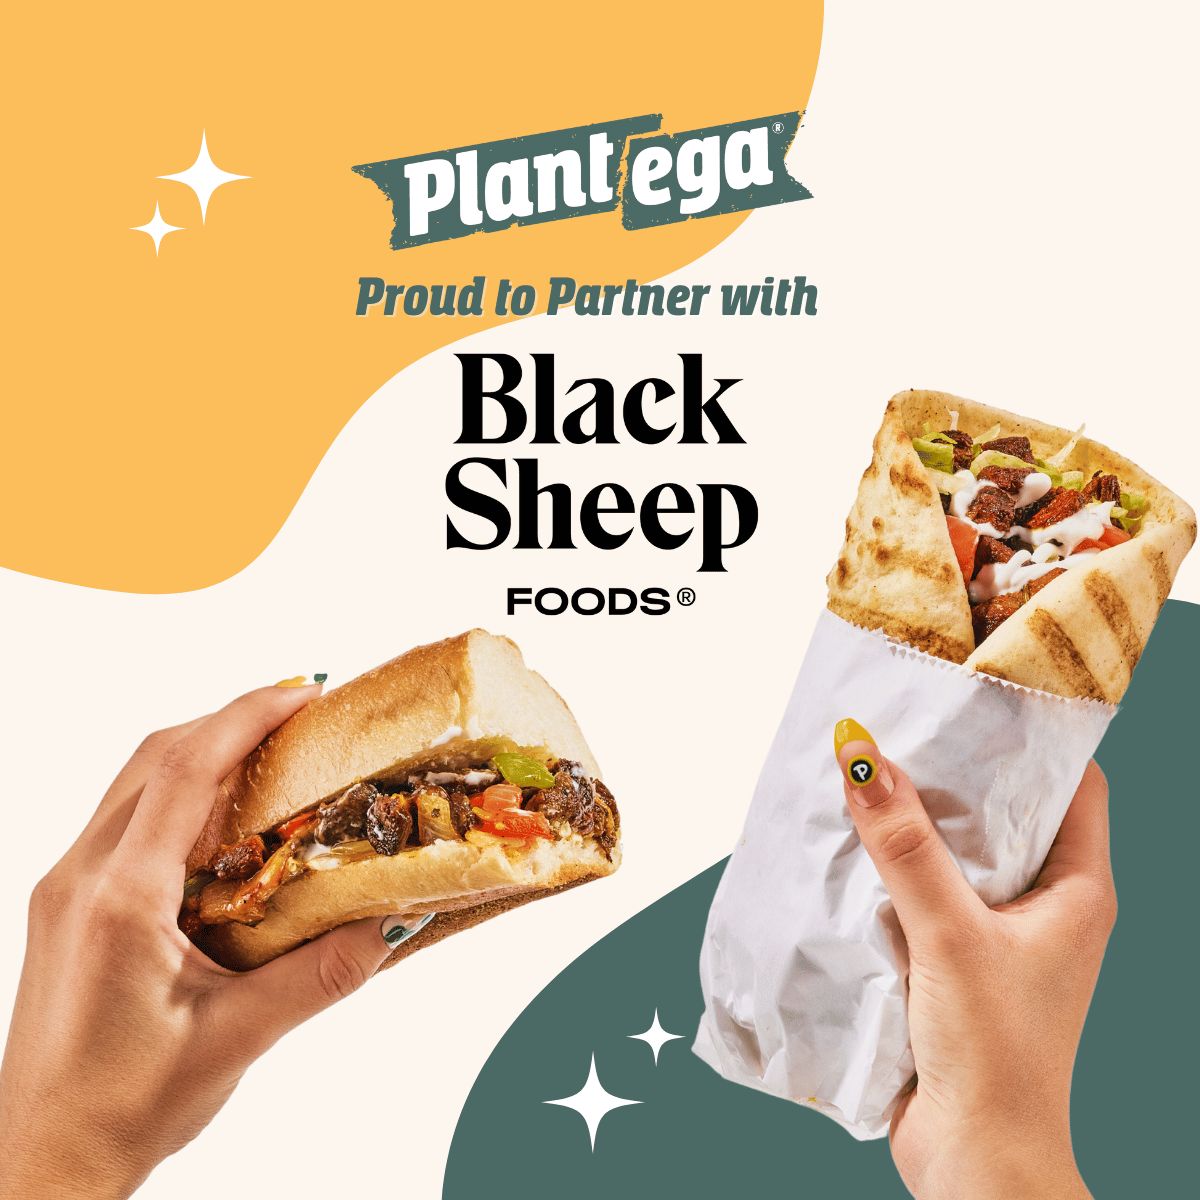 Food tech startup @blacksheepeat, renowned for culinary innovation and commitment to excellence, announced a partnership w/@eatplantega in New York City. Plantega will present 3 dishes featuring Black Sheep Foods steak bites: Shawarma Over Rice, Shawarma Gyro & Philly Cheese Sub.